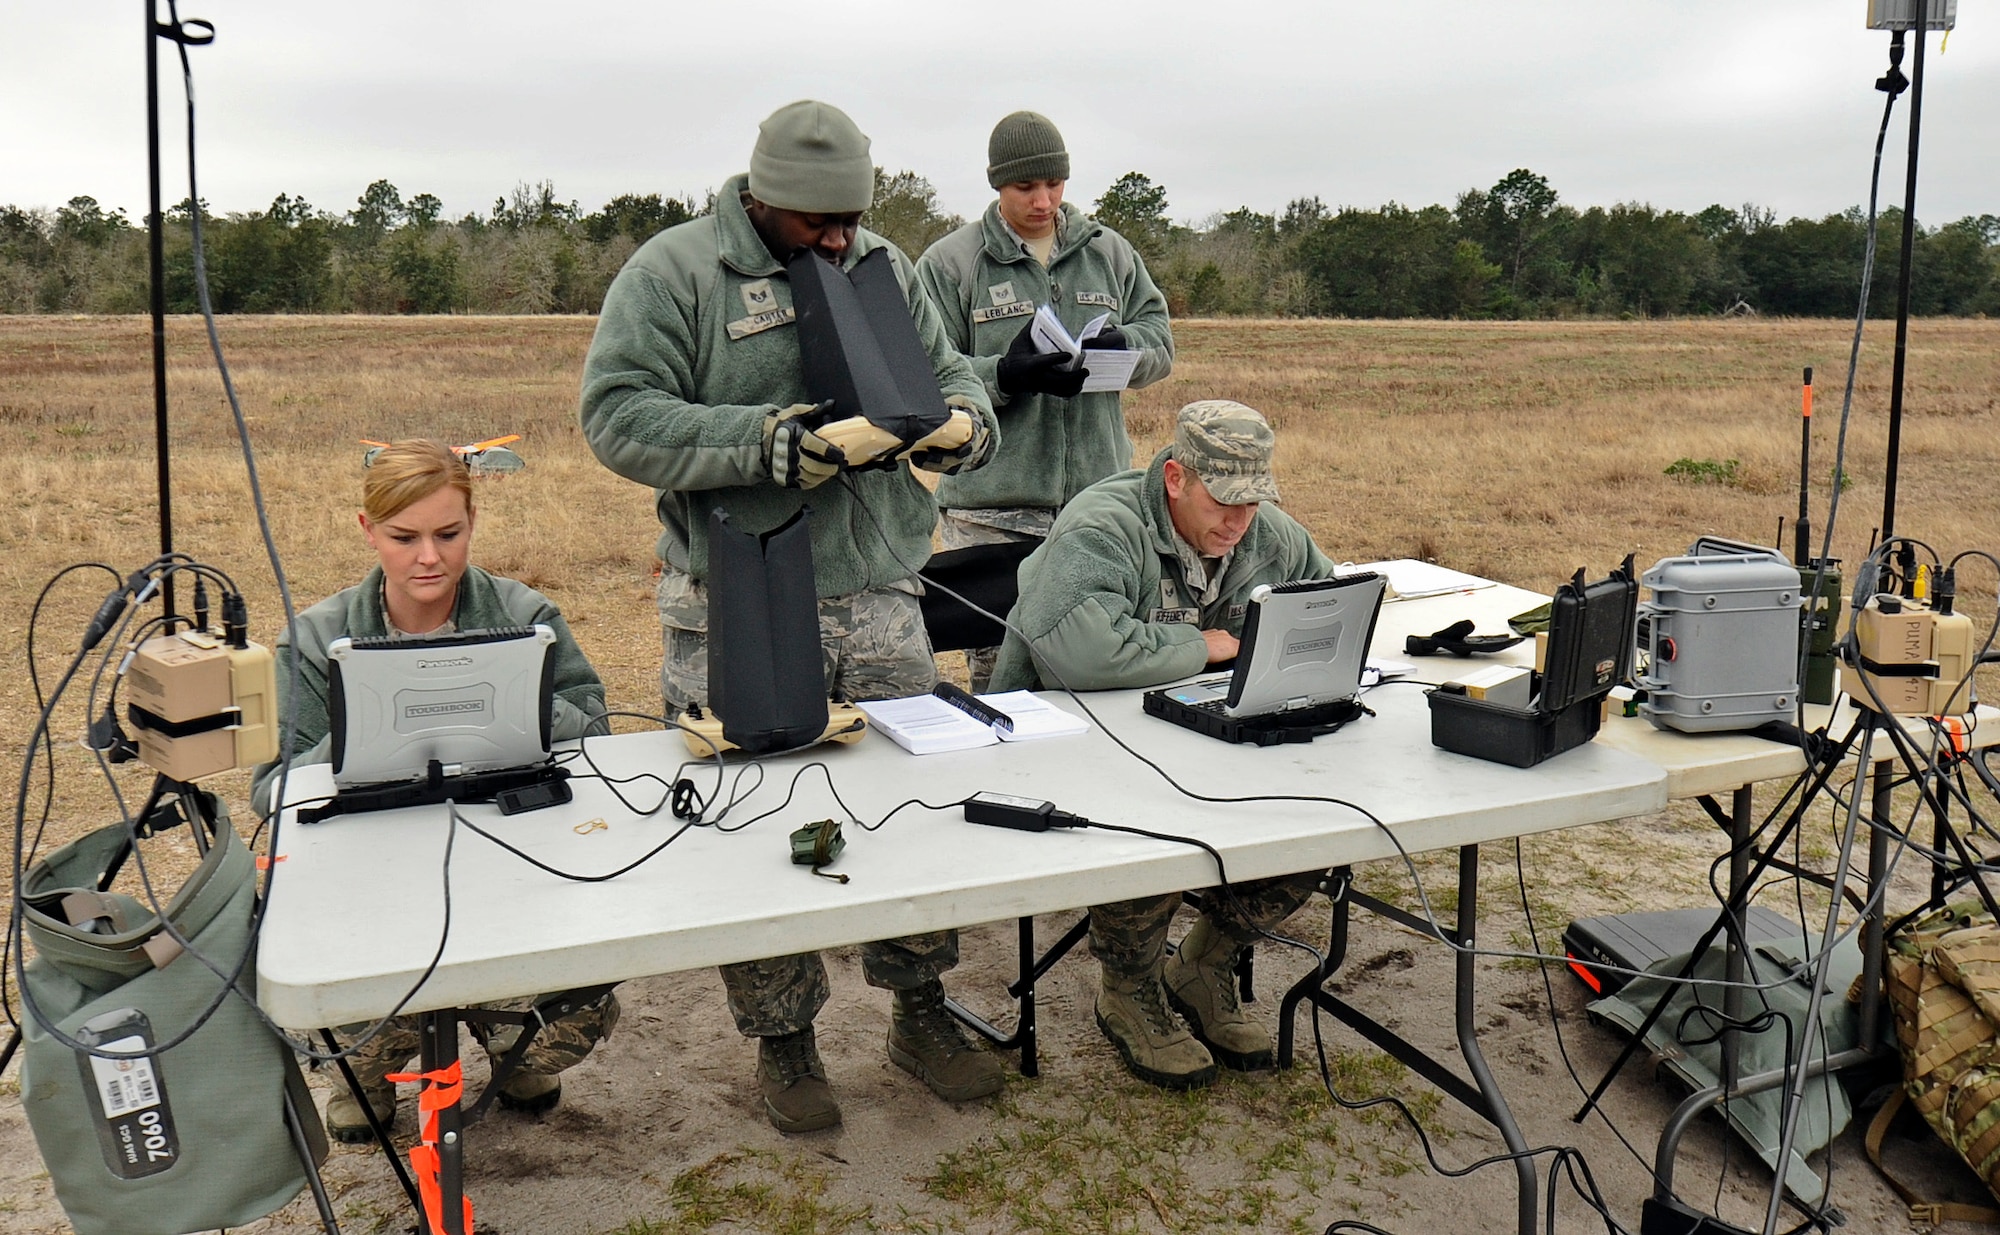 A team from the 1st Special Operations Security Forces Squadron conducts small unmanned aerial system training at Choctaw Field, Fla., March 4, 2014. The Airmen trained on launches, navigational procedures and landings during their live flights. (U.S. Air Force photo/Senior Airman Michelle Patten)


